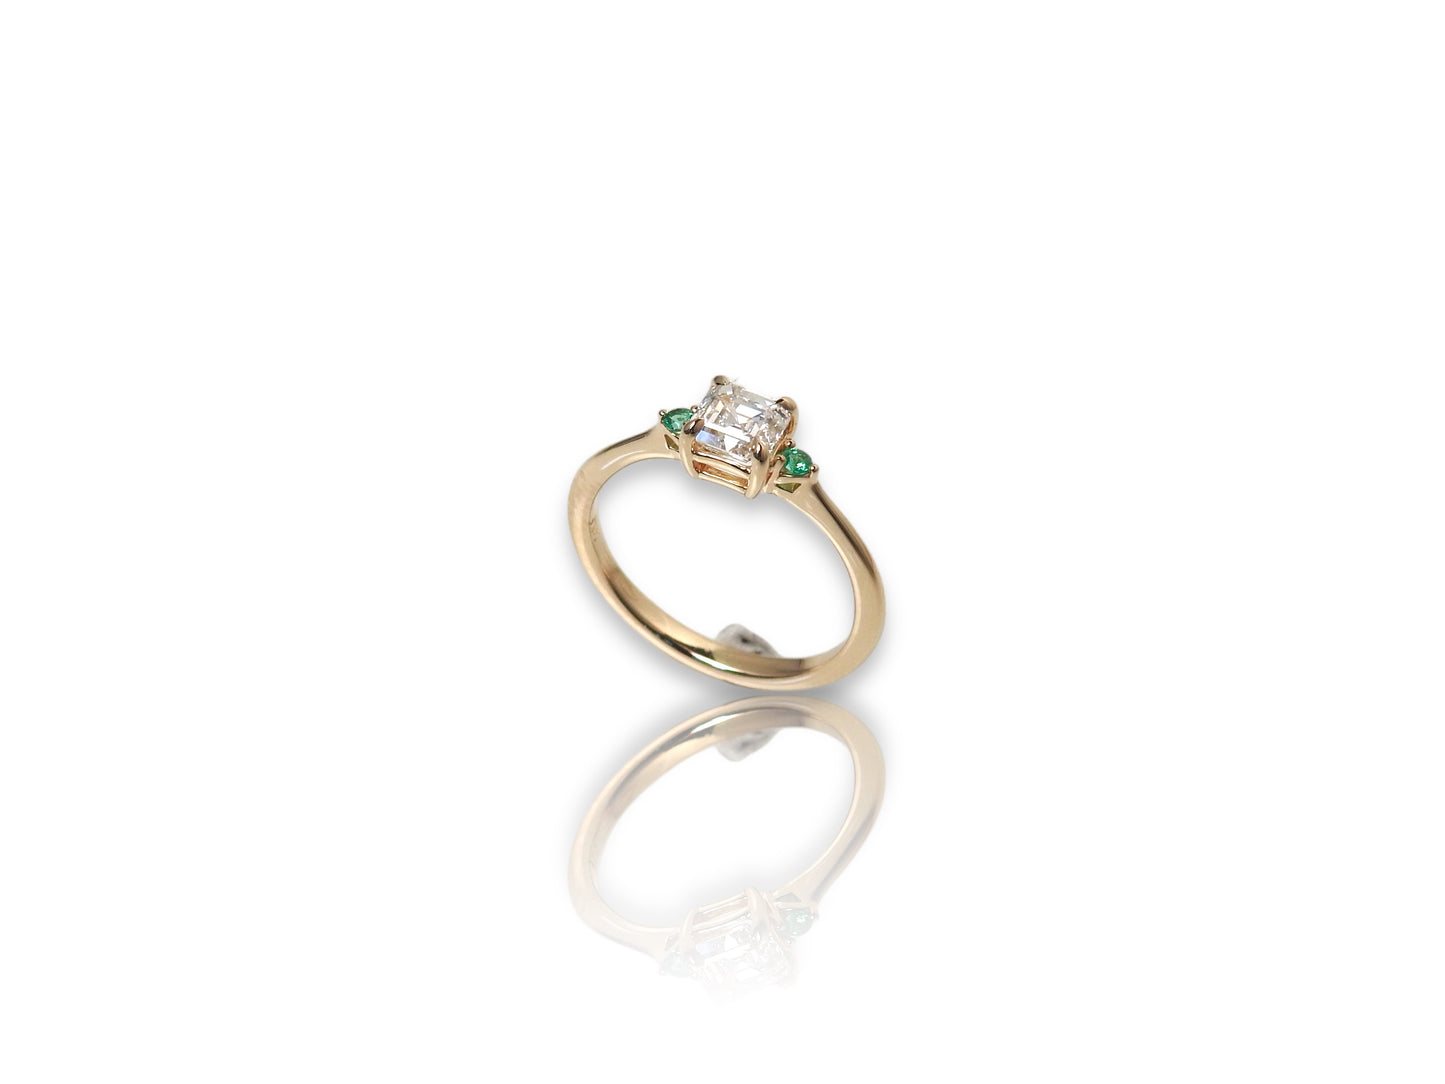 Bespoke engagement ring with an asscher cut diamond and accent emeralds in 14kt yellow gold, by ZEALmetal, Nicole Horlor, in Kingston, ON, Canada